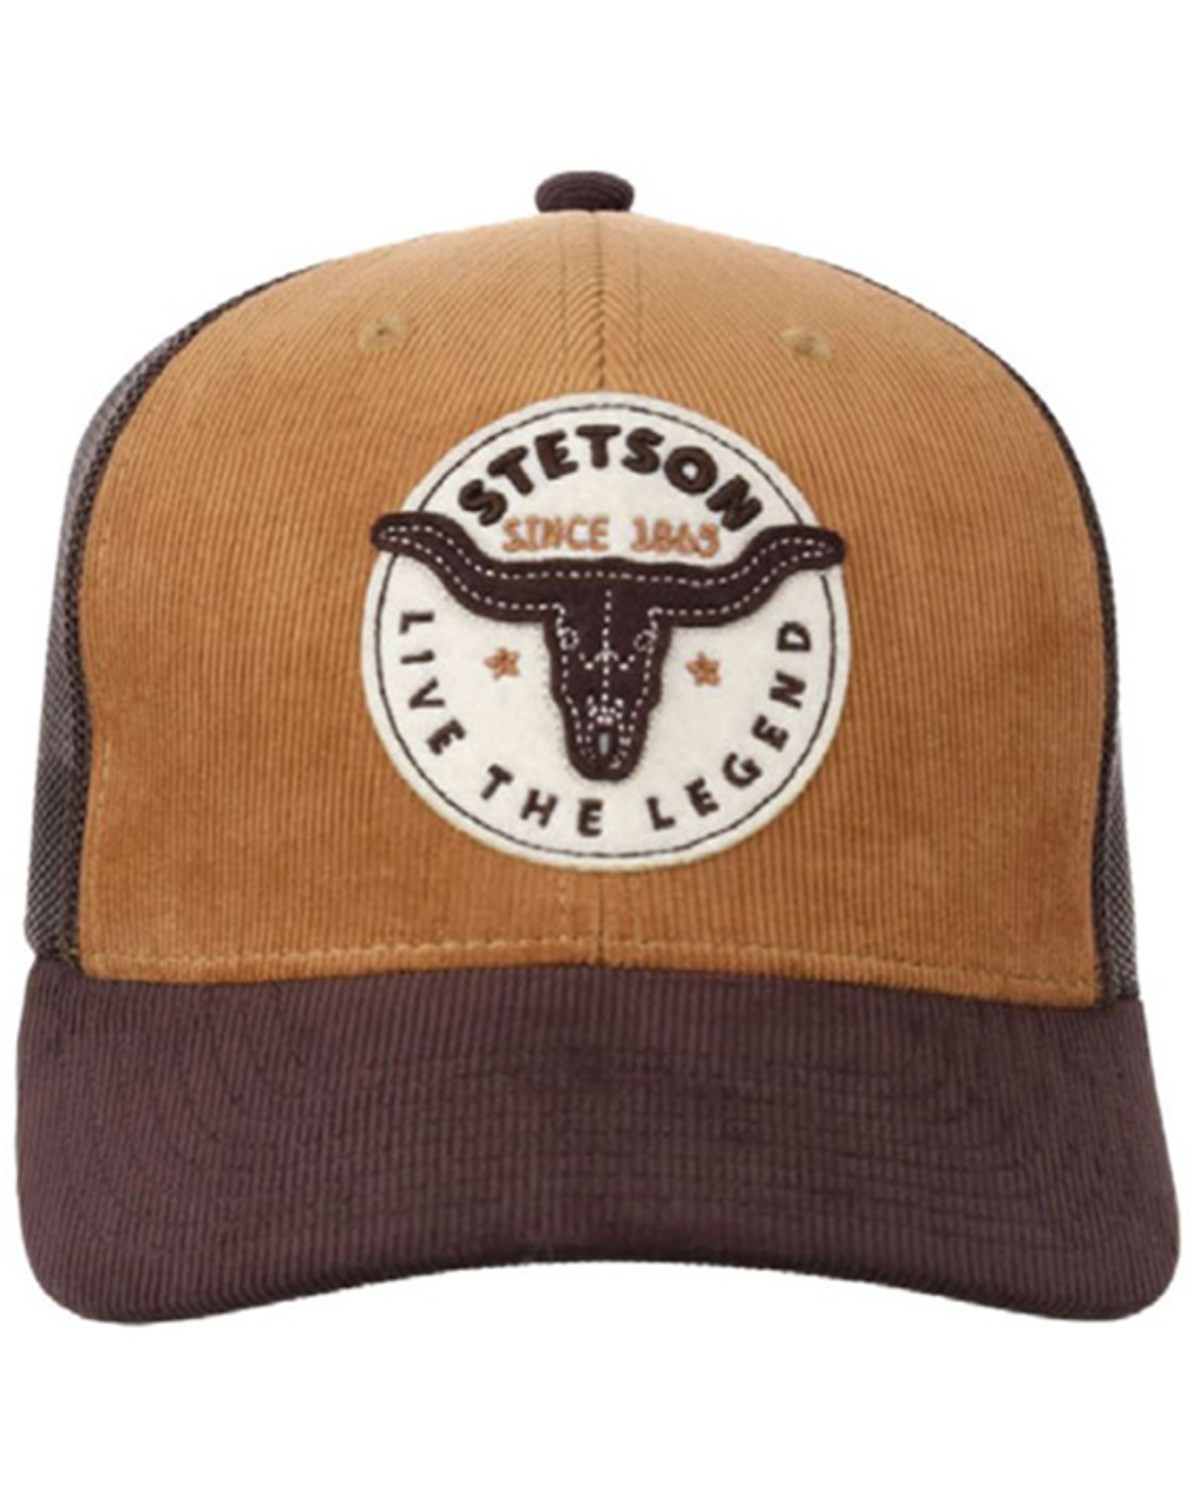 Stetson Men's Corduroy Embroidered Steer Head Patch Tracker Cap